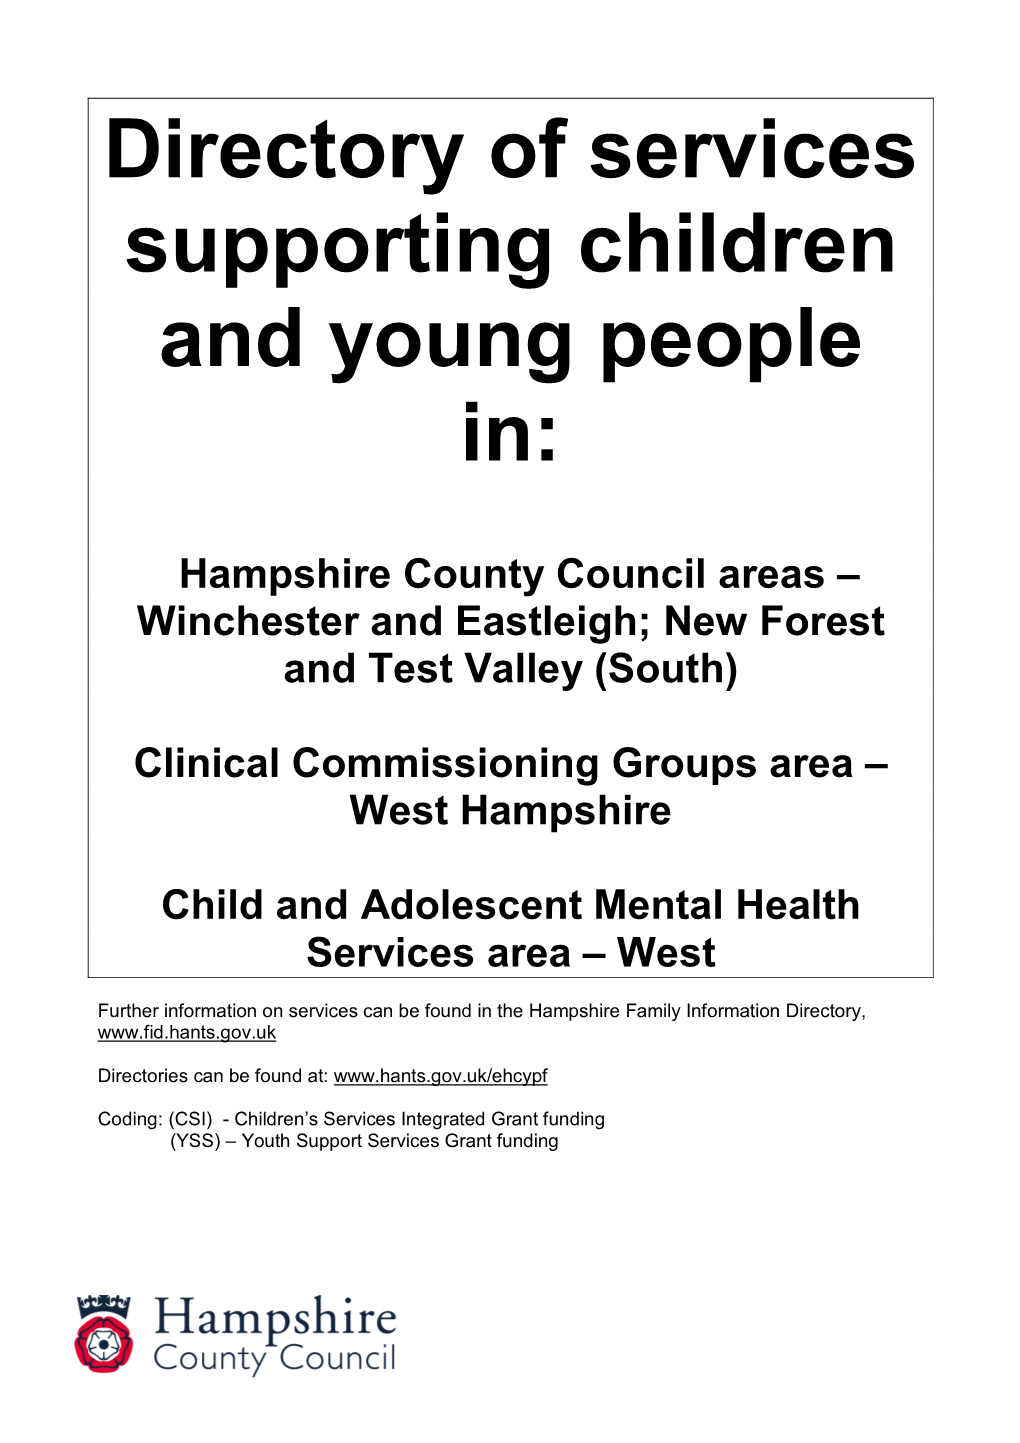 Directory of Services Supporting Children and Young People In